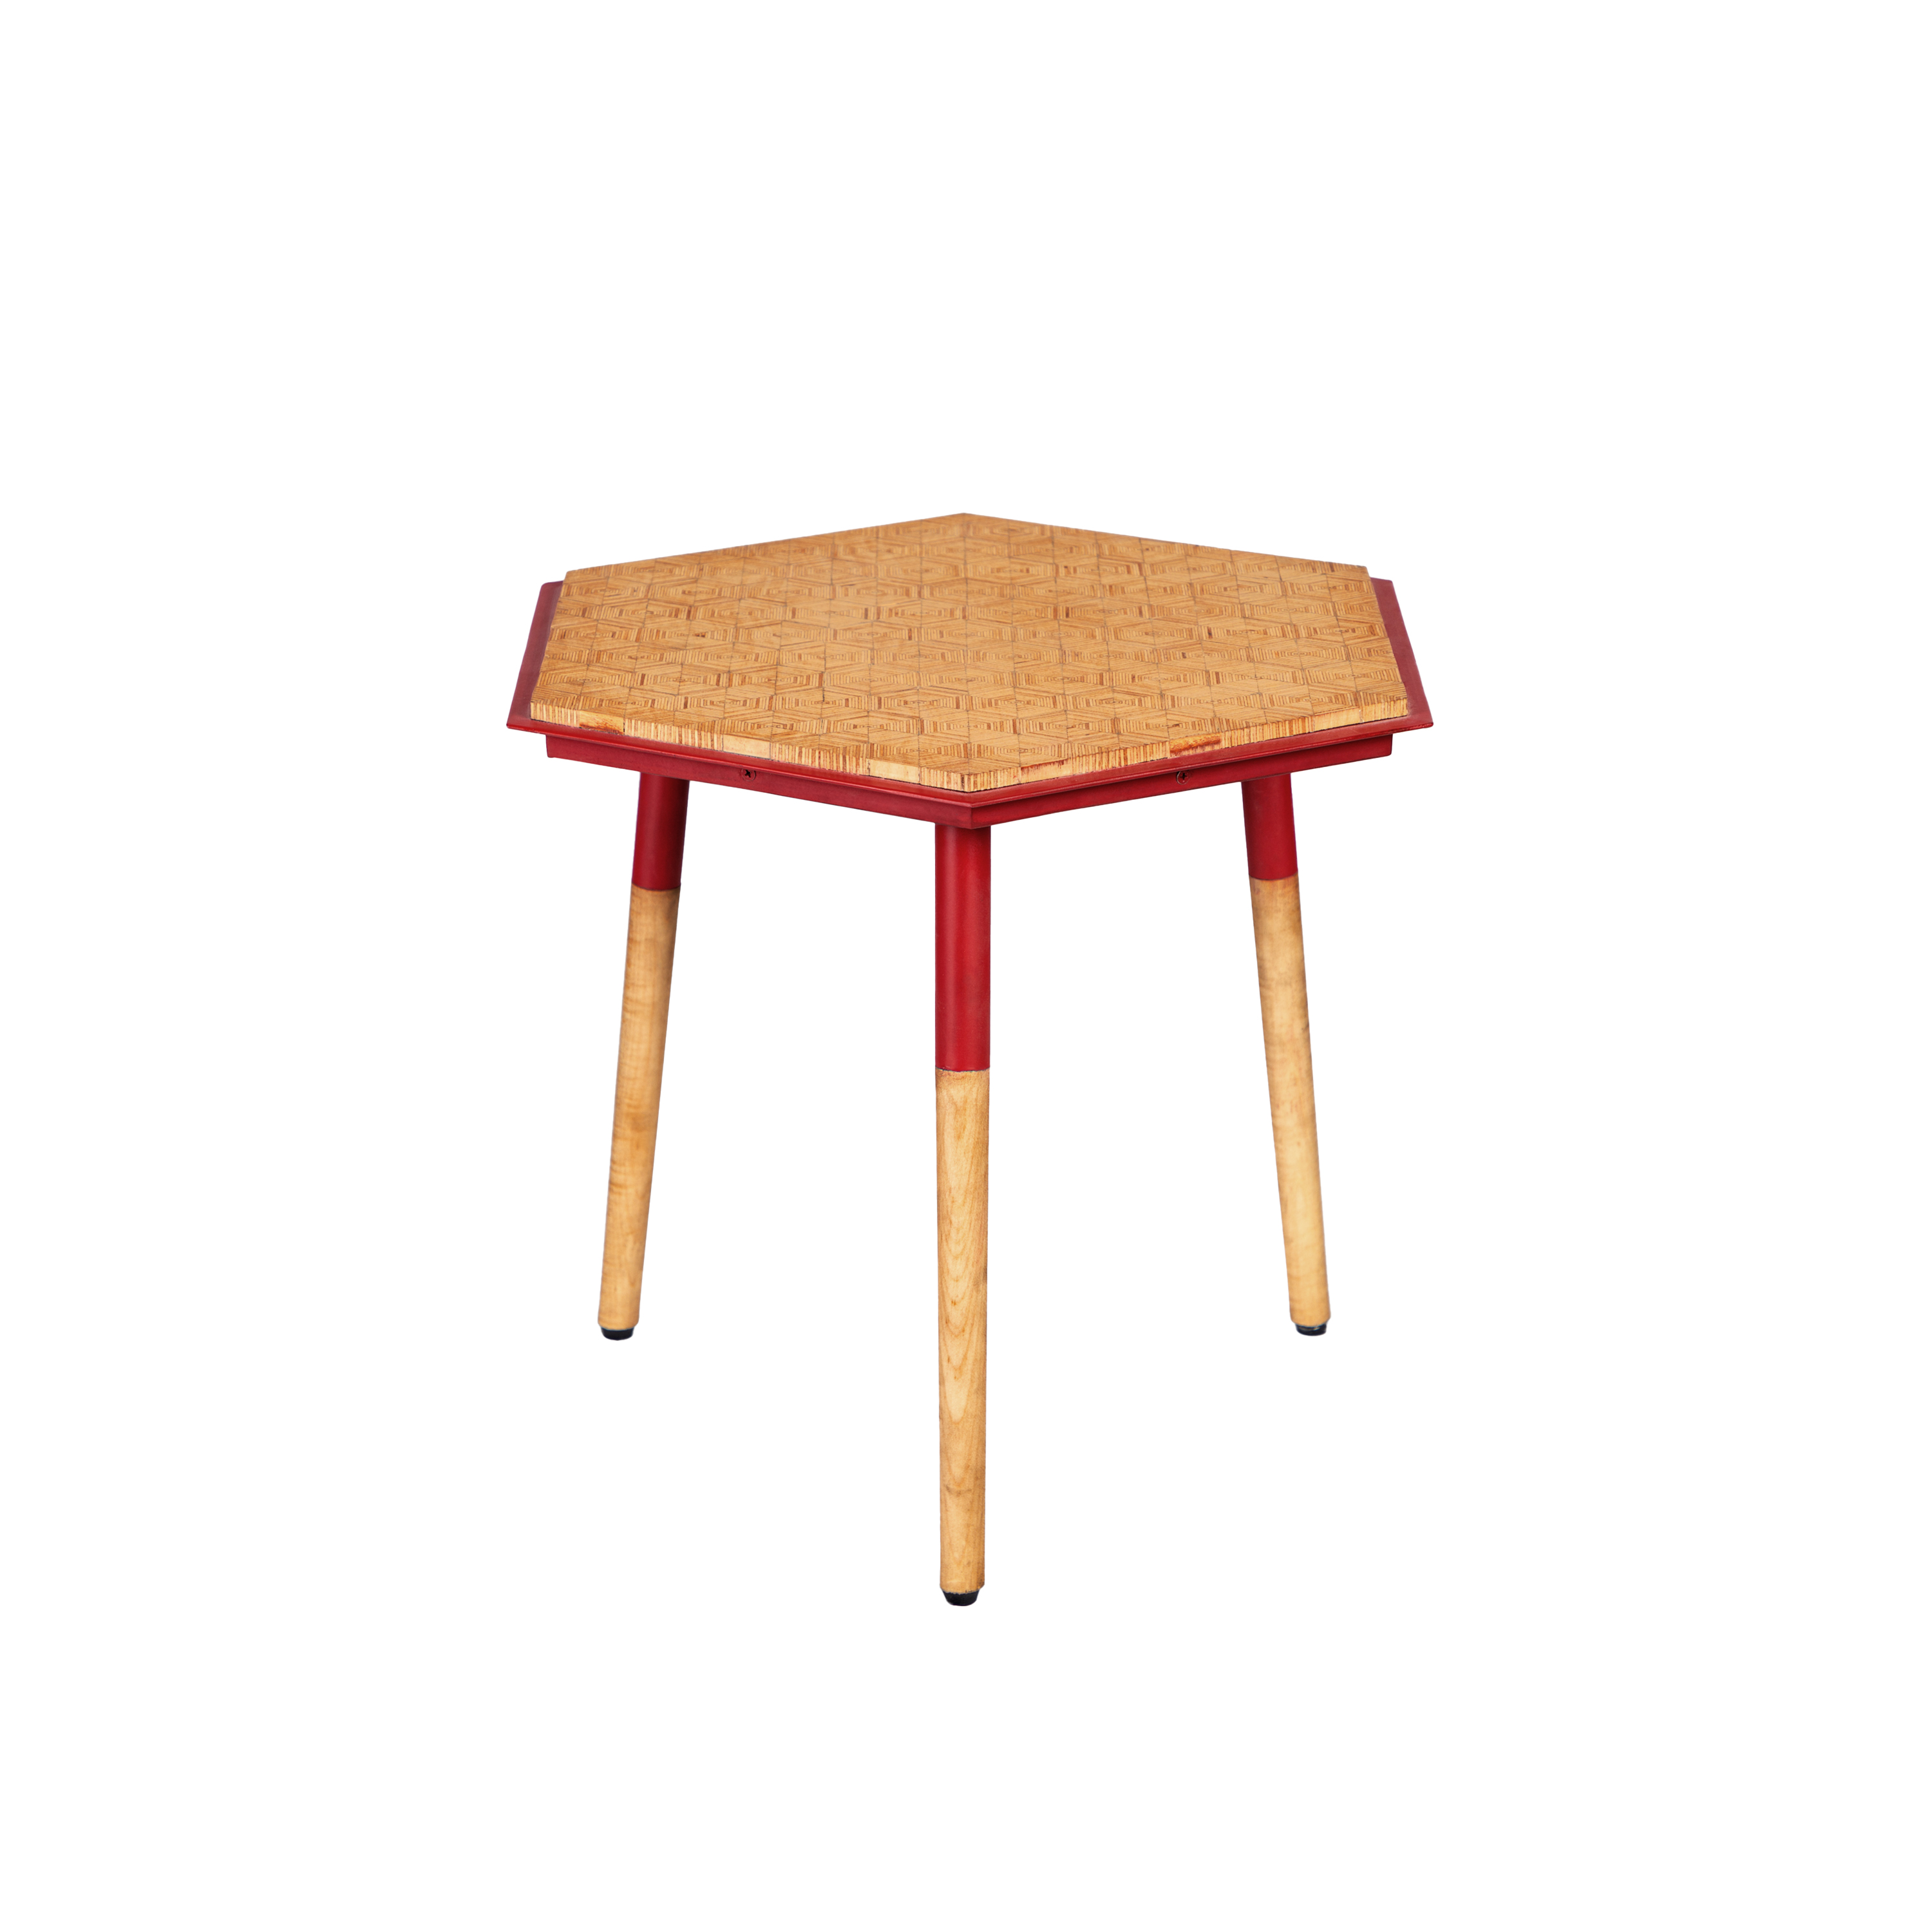 Paige 18 Inch Hexagon Illusion Wood Side Table, Brown, Red